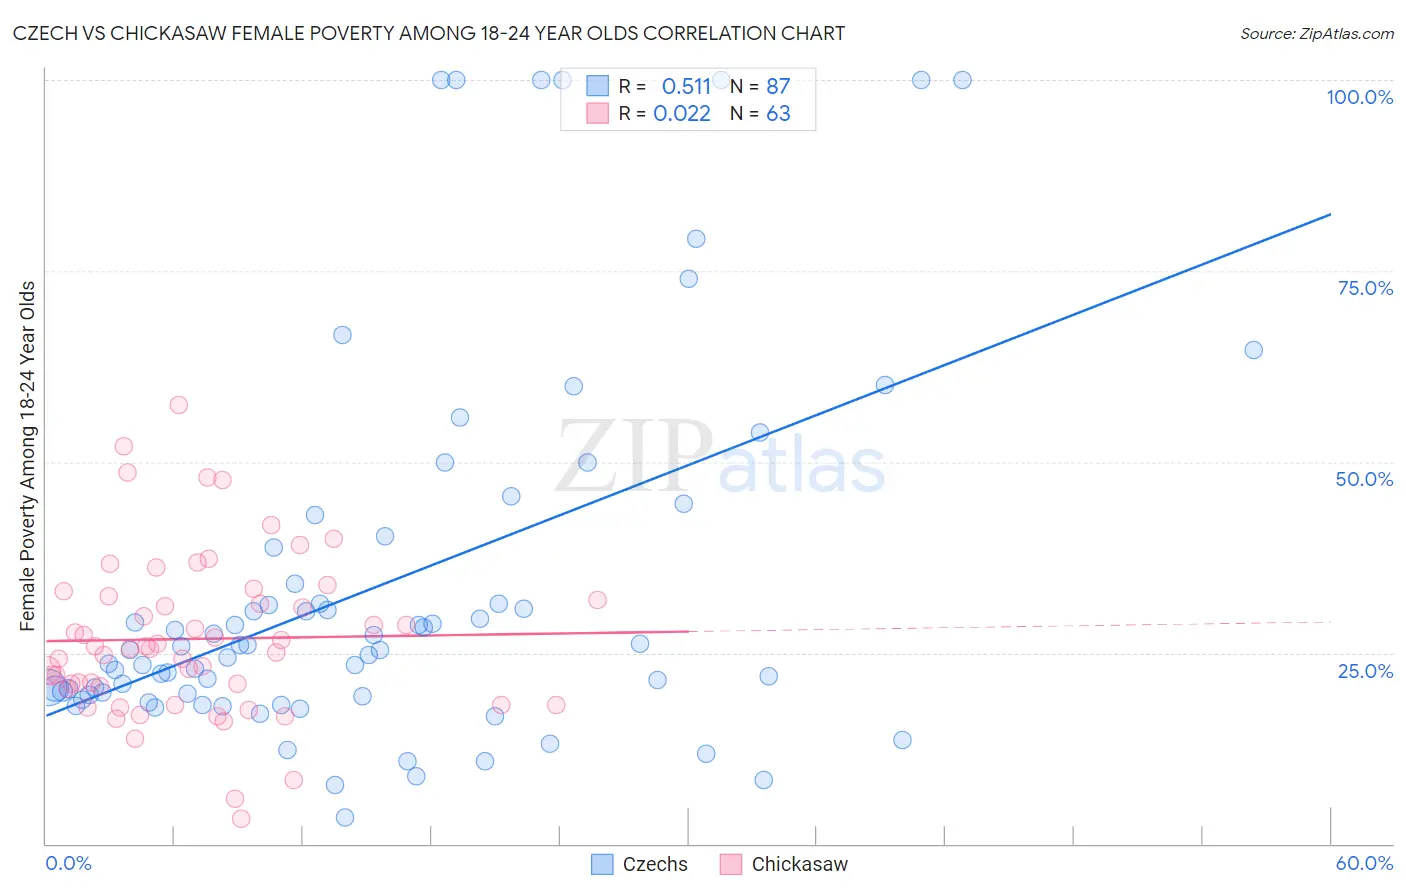 Czech vs Chickasaw Female Poverty Among 18-24 Year Olds